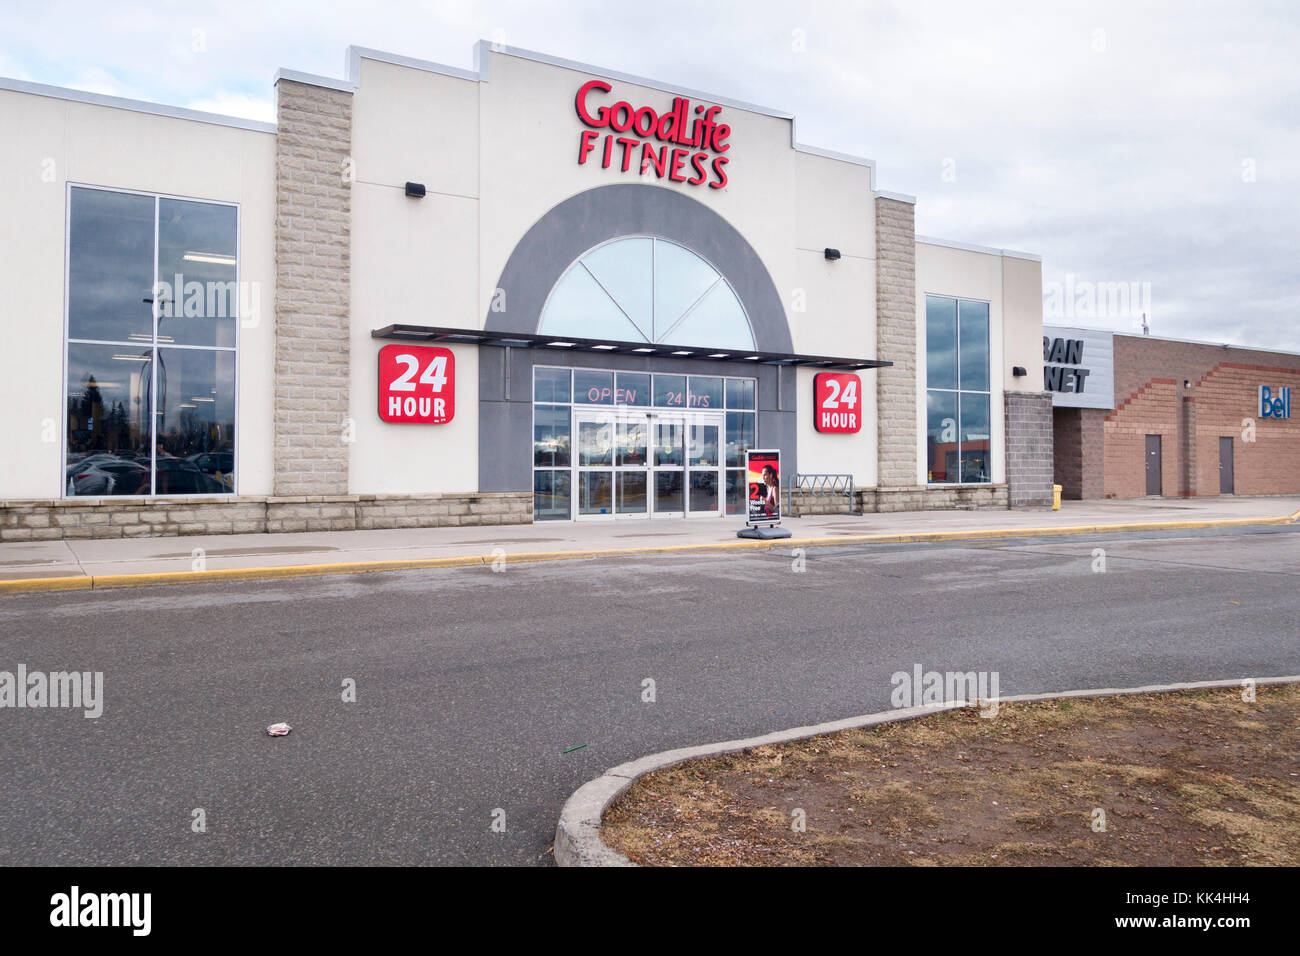 Goodlife Fitness, a 24 hour fitness gym in Peterborough Ontario Canada Stock Photo